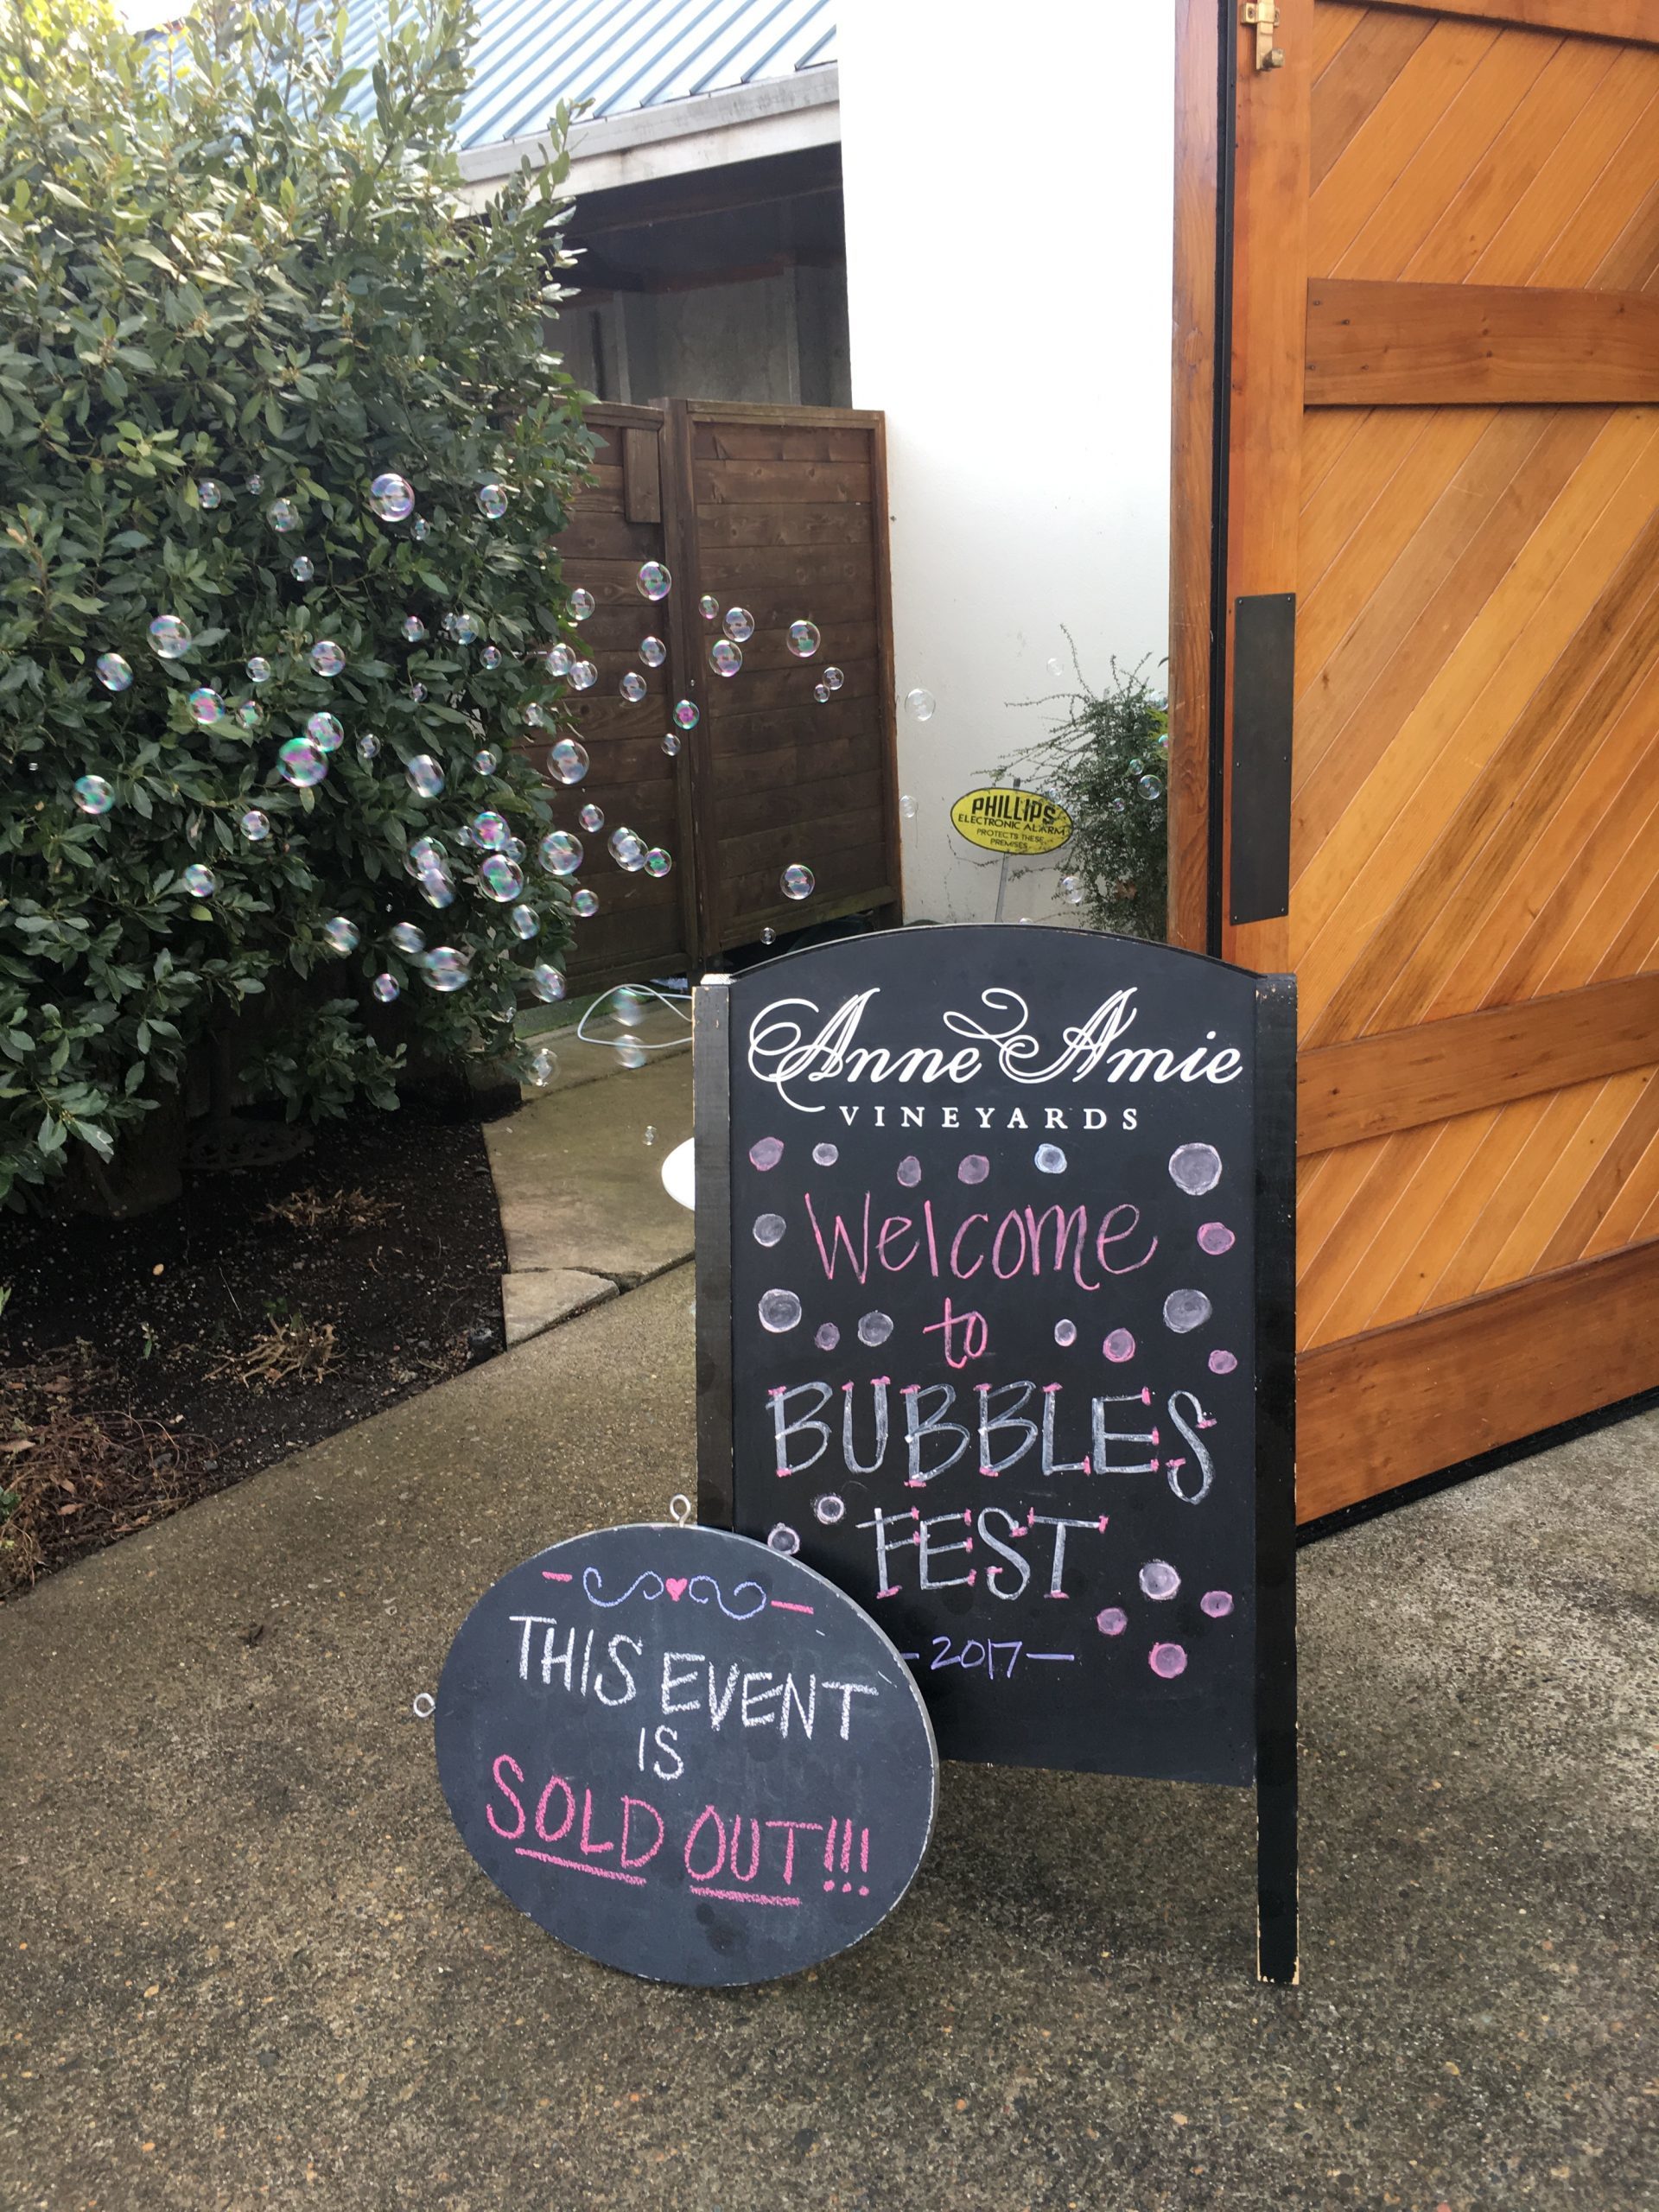 Anne Amie Vineyards Bubbles Fest 2017 Chalk board sign. The start of Bubbly Side of Life